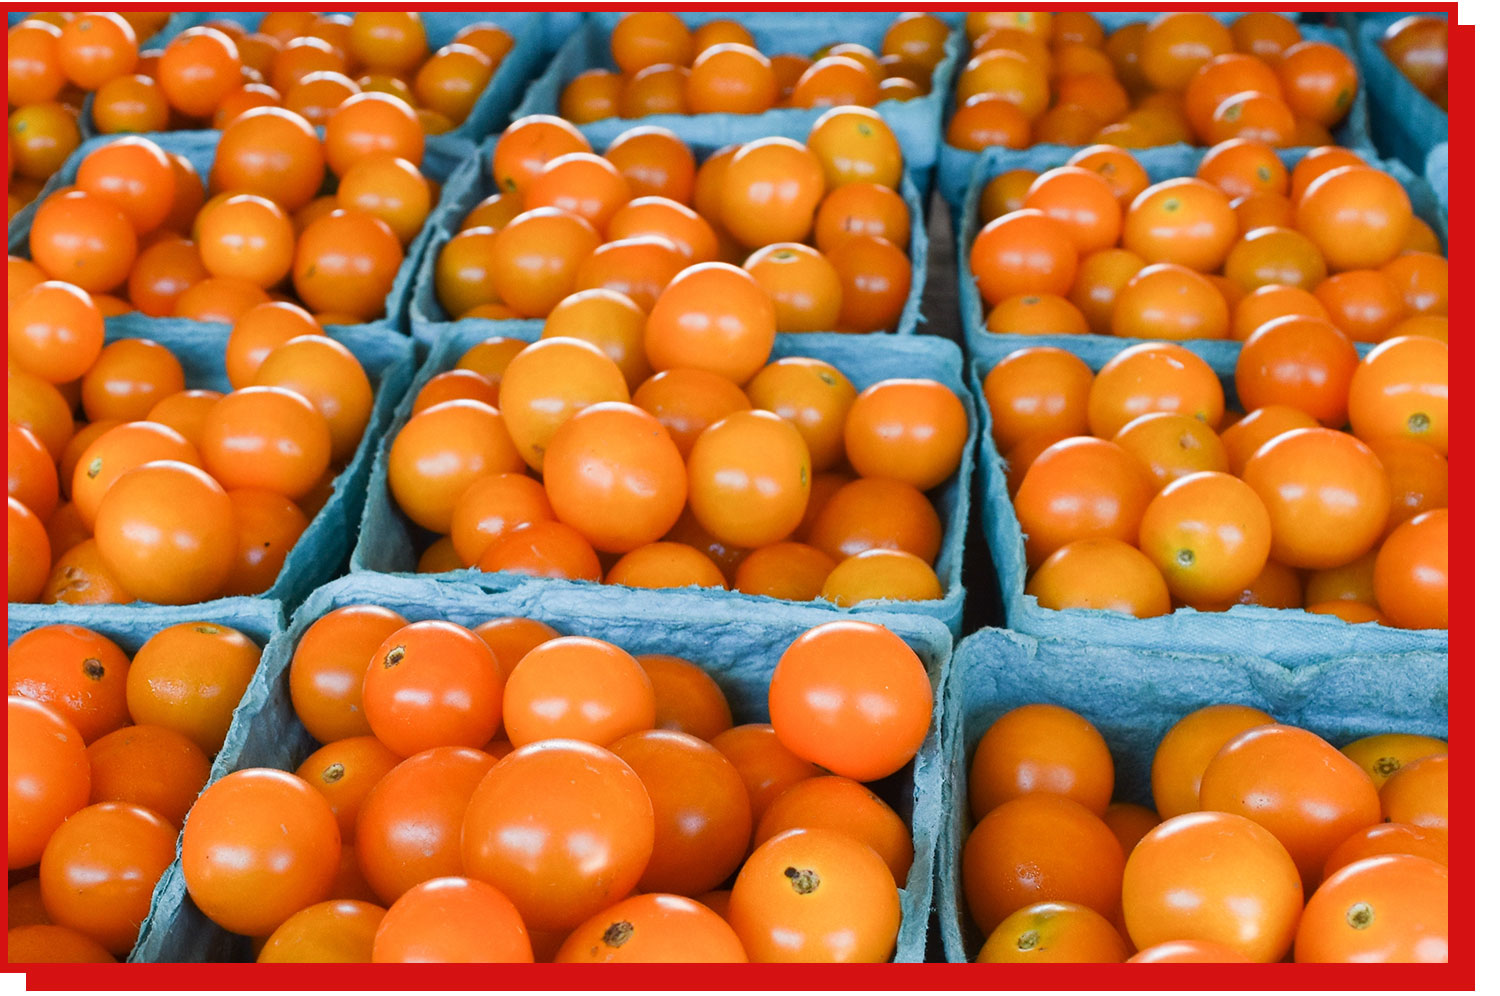 cartons of sungold tomatoes